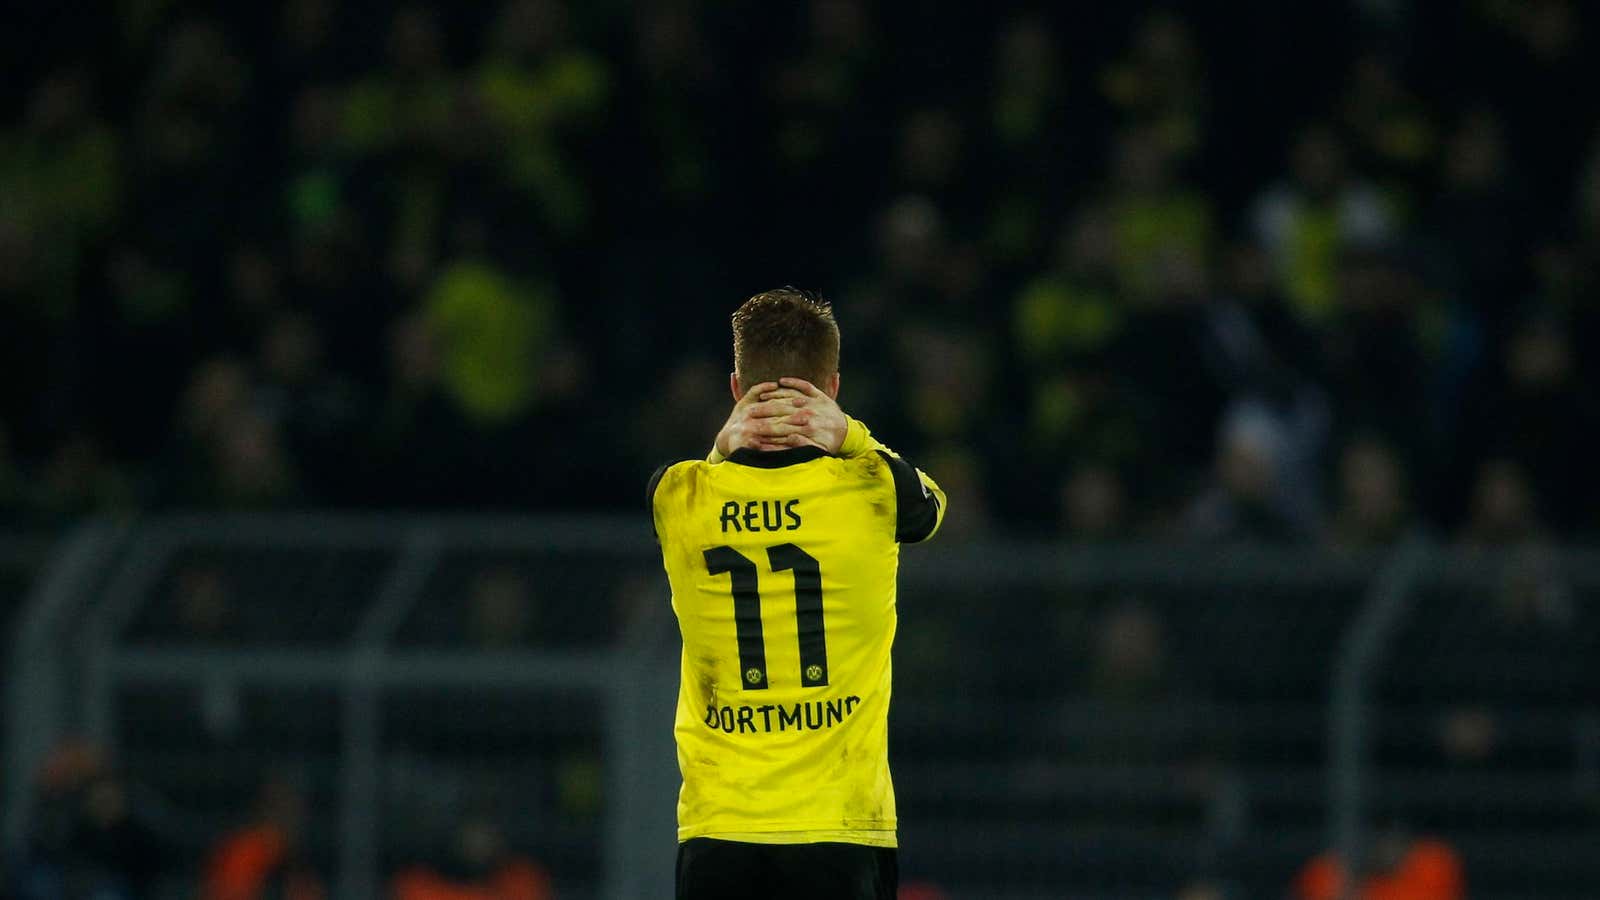 A Dortmund player for how much longer?